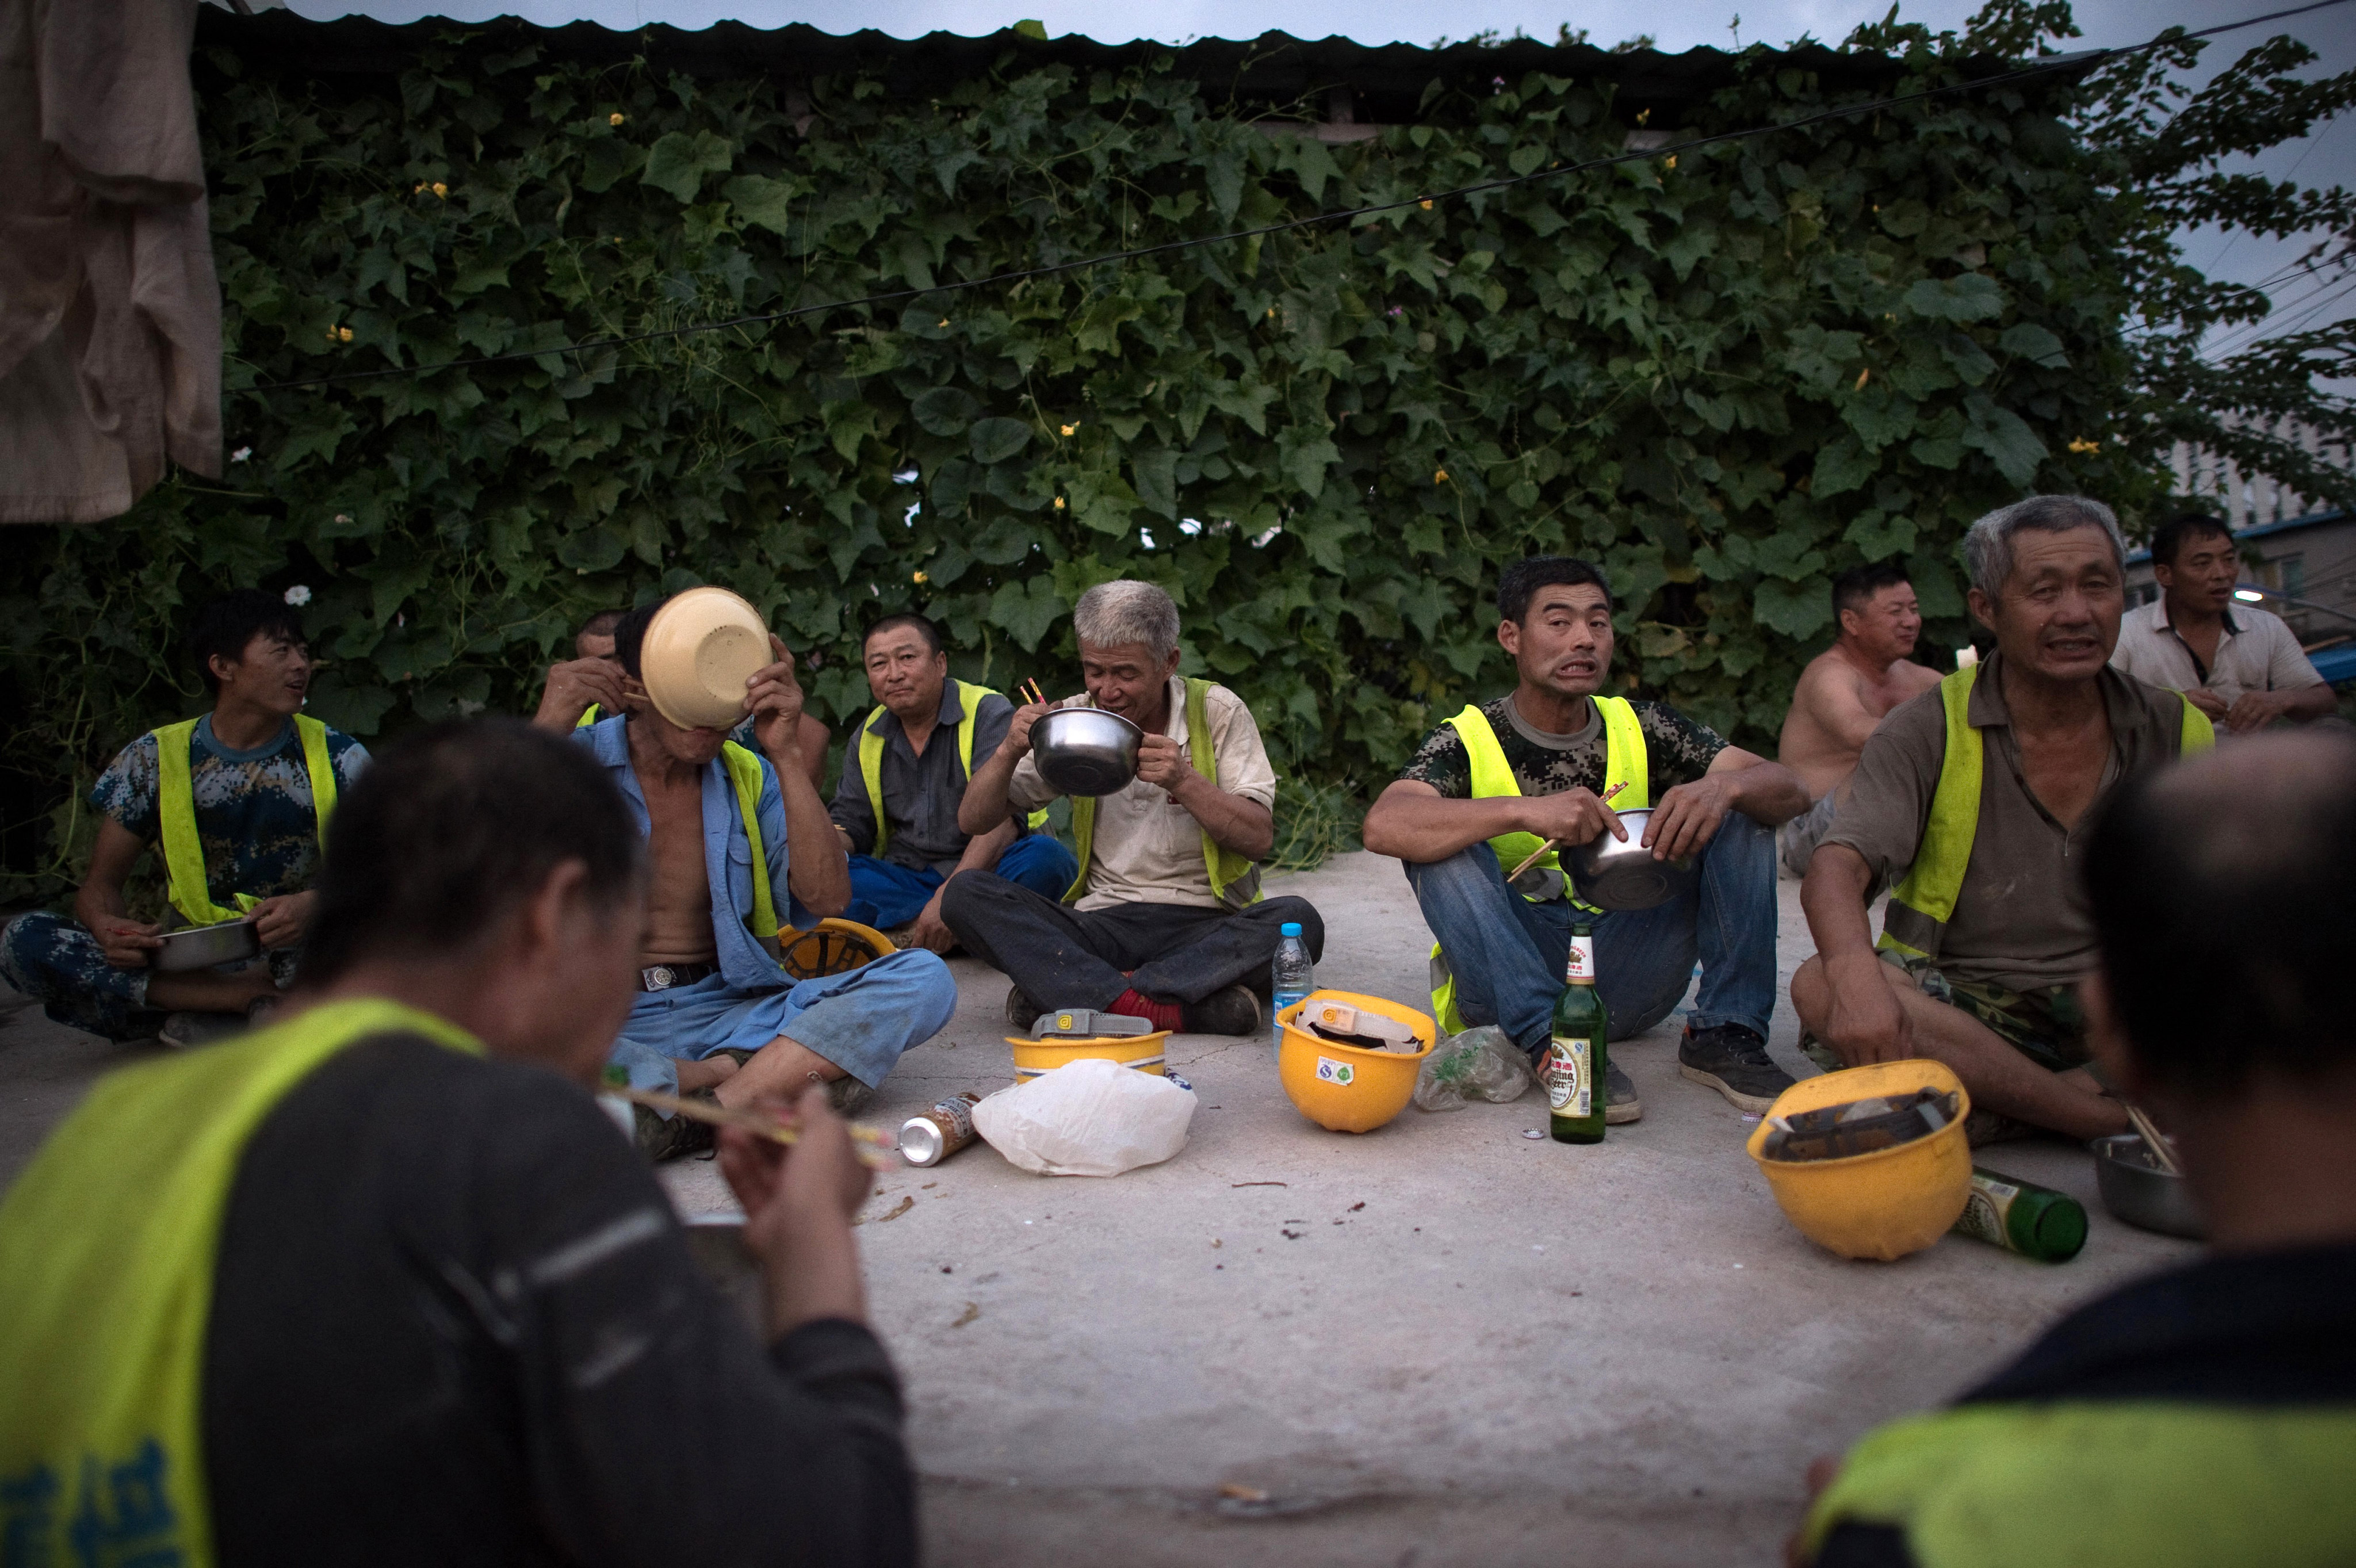 Construction workers eat dinner at the end of the day in a migrant village on the outskirts of Beijing on August 17, 2017. Photo: AFP